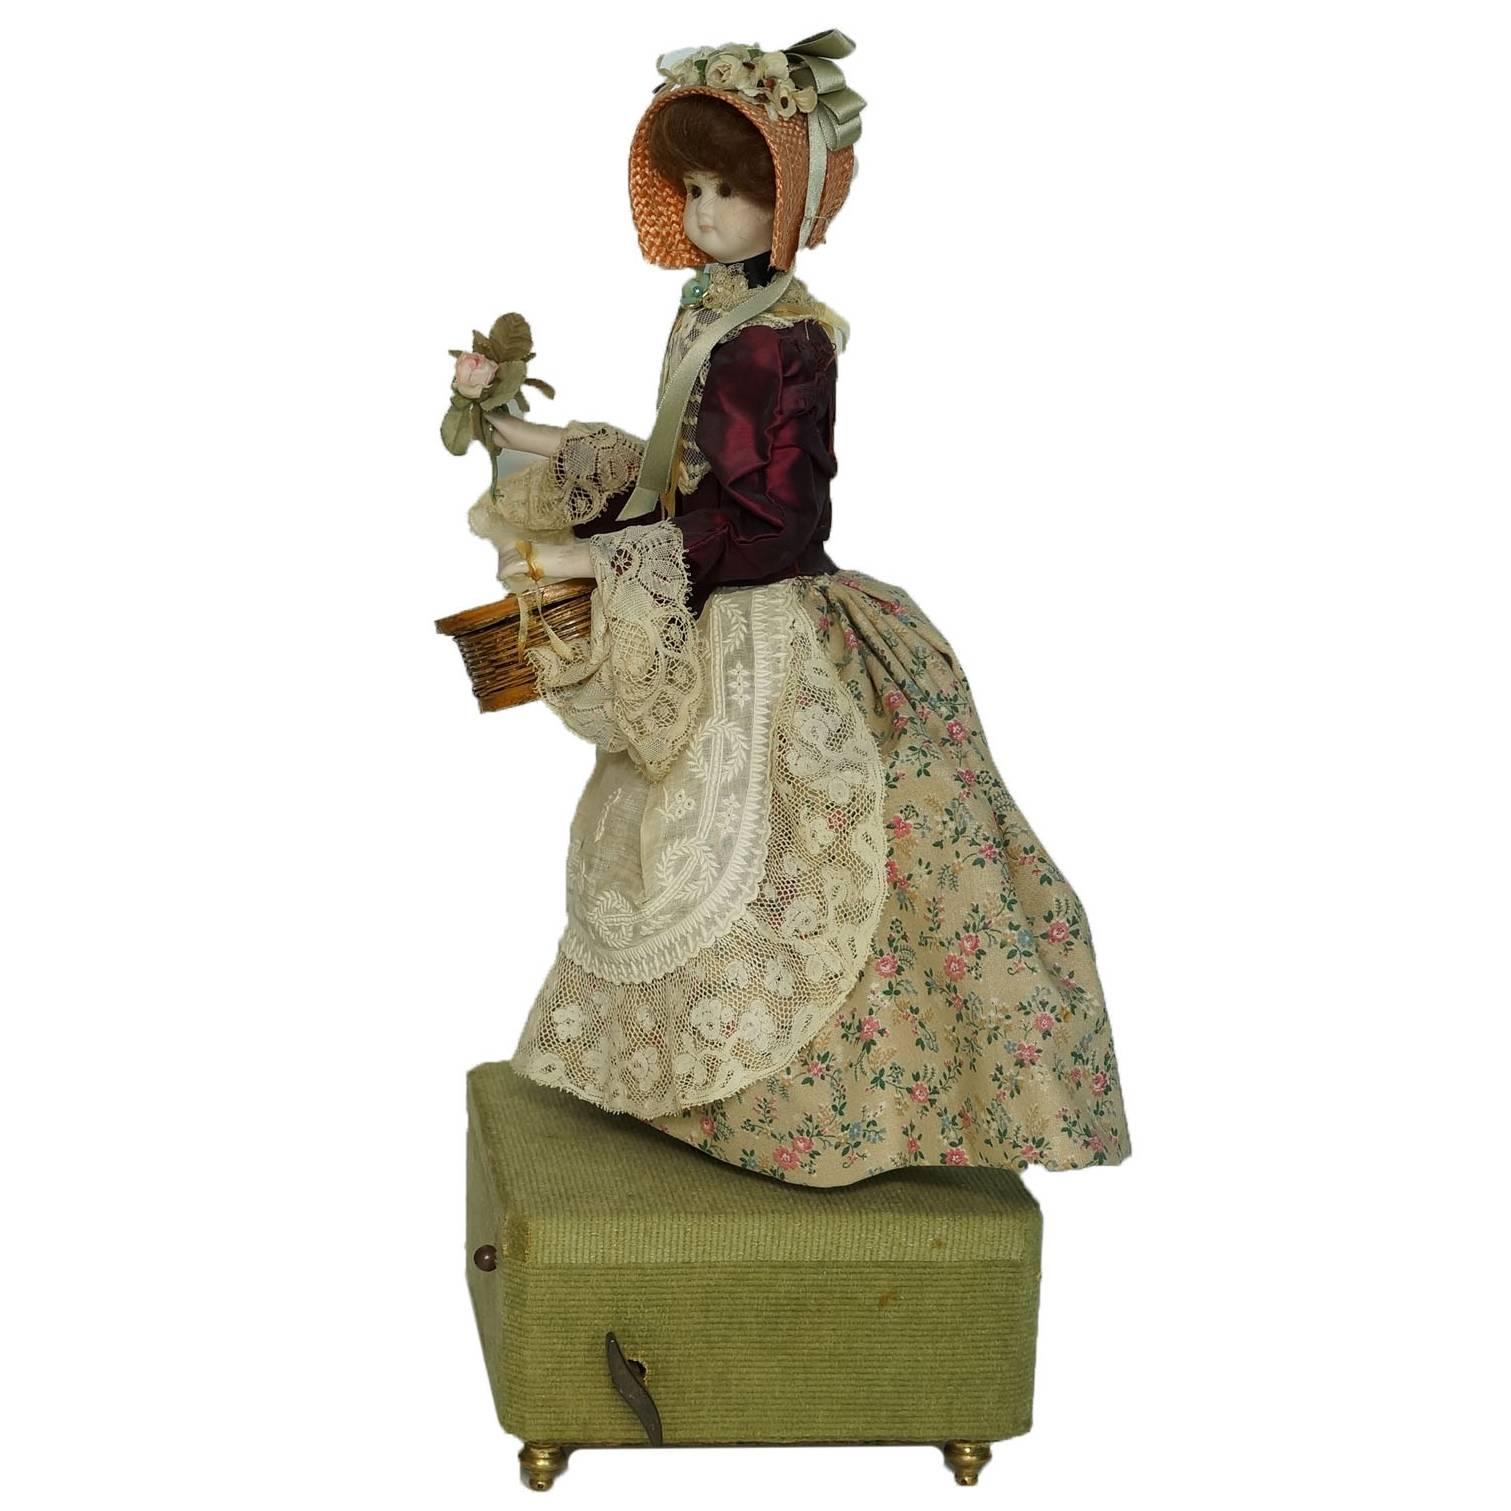 Automaton Figure of a Standing Girl Holding Flowers Playing Music